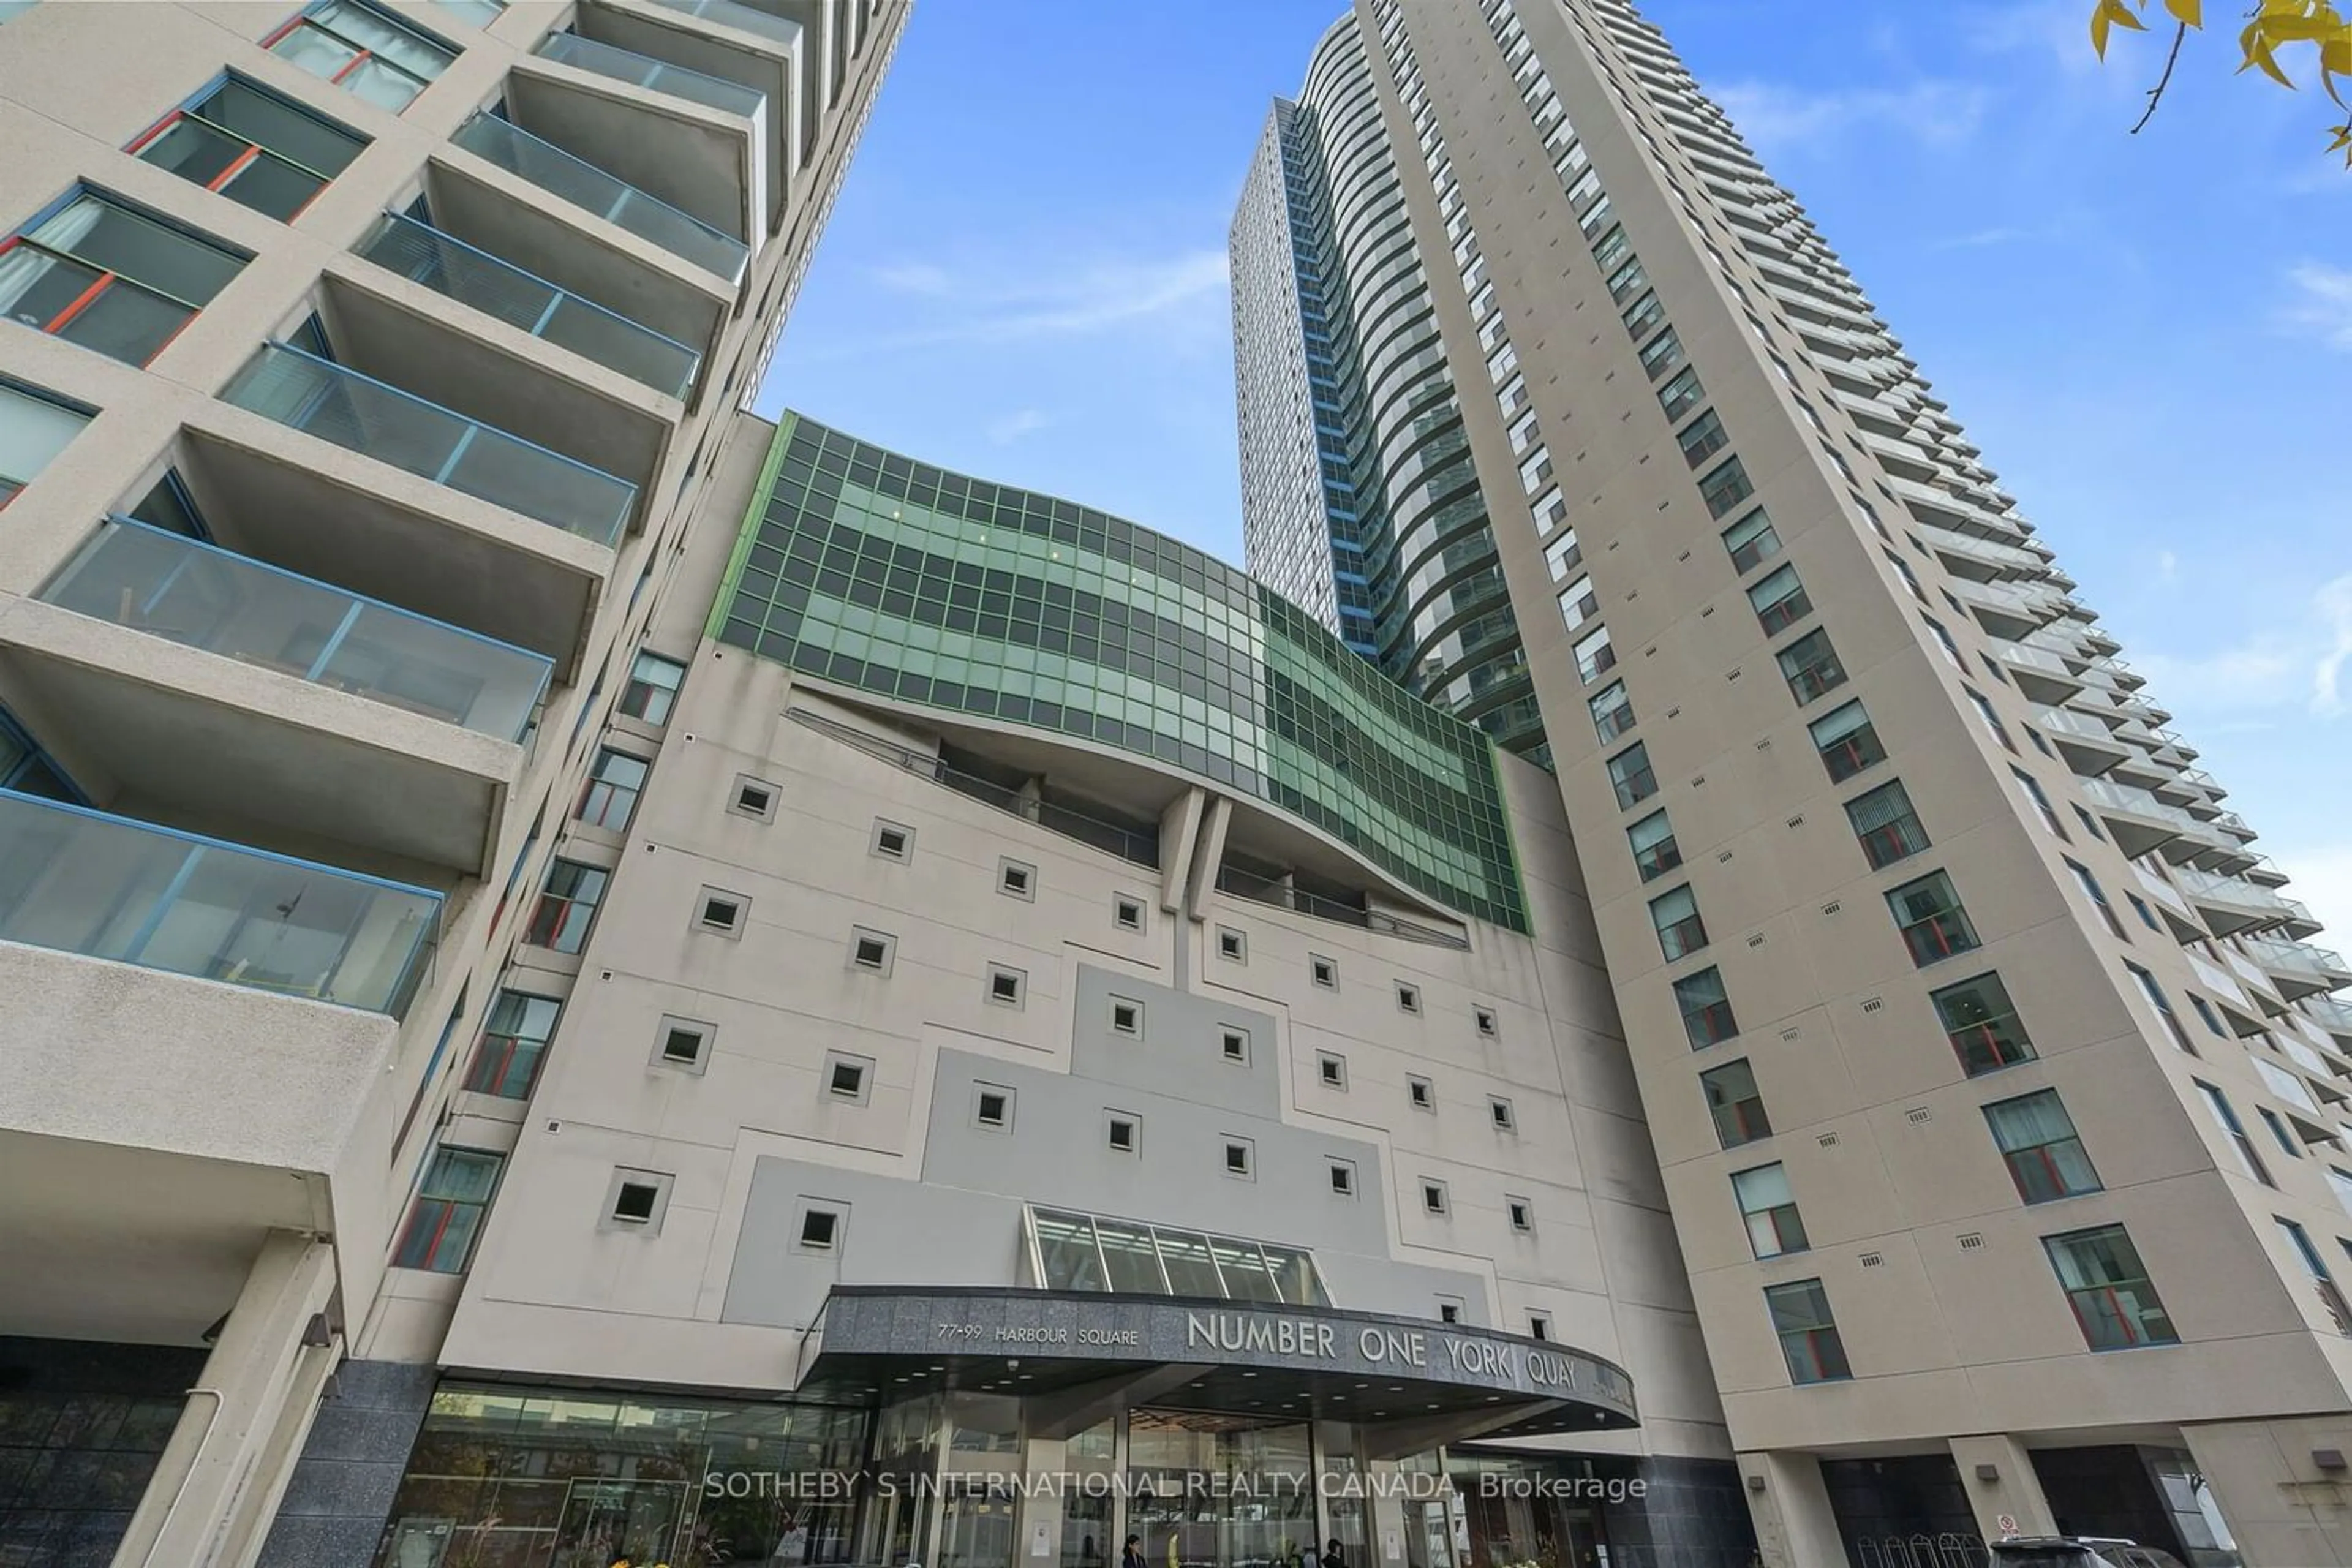 A pic from exterior of the house or condo for 77 Harbour Sq #3701, Toronto Ontario M5J 2S2